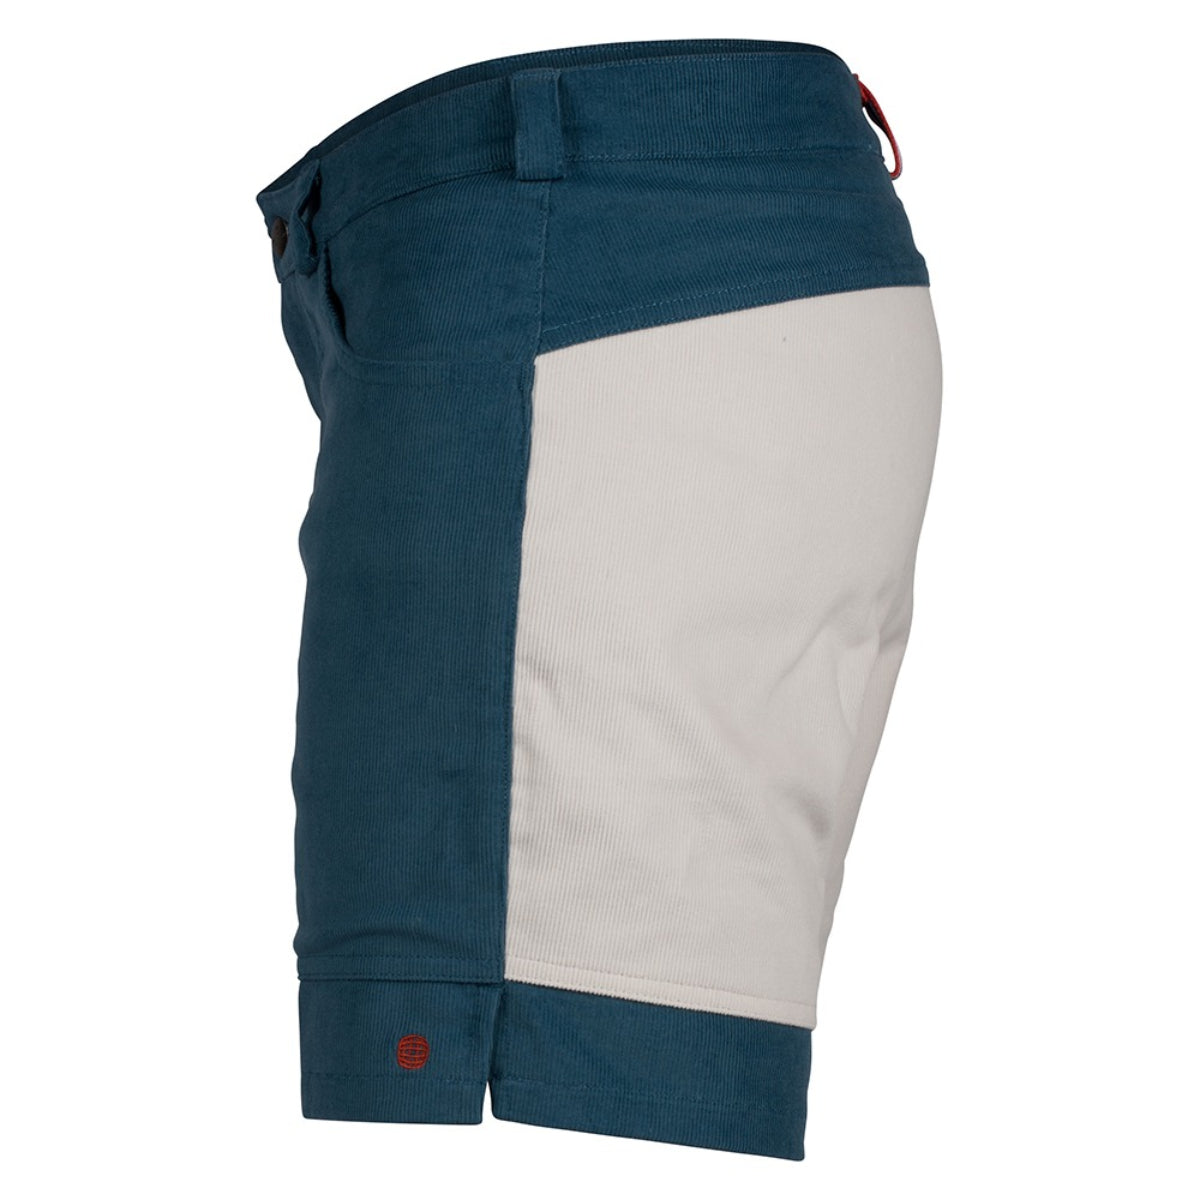 Amundsen 7 Incher Concord Shorts Mens - Faded Blue / Natural